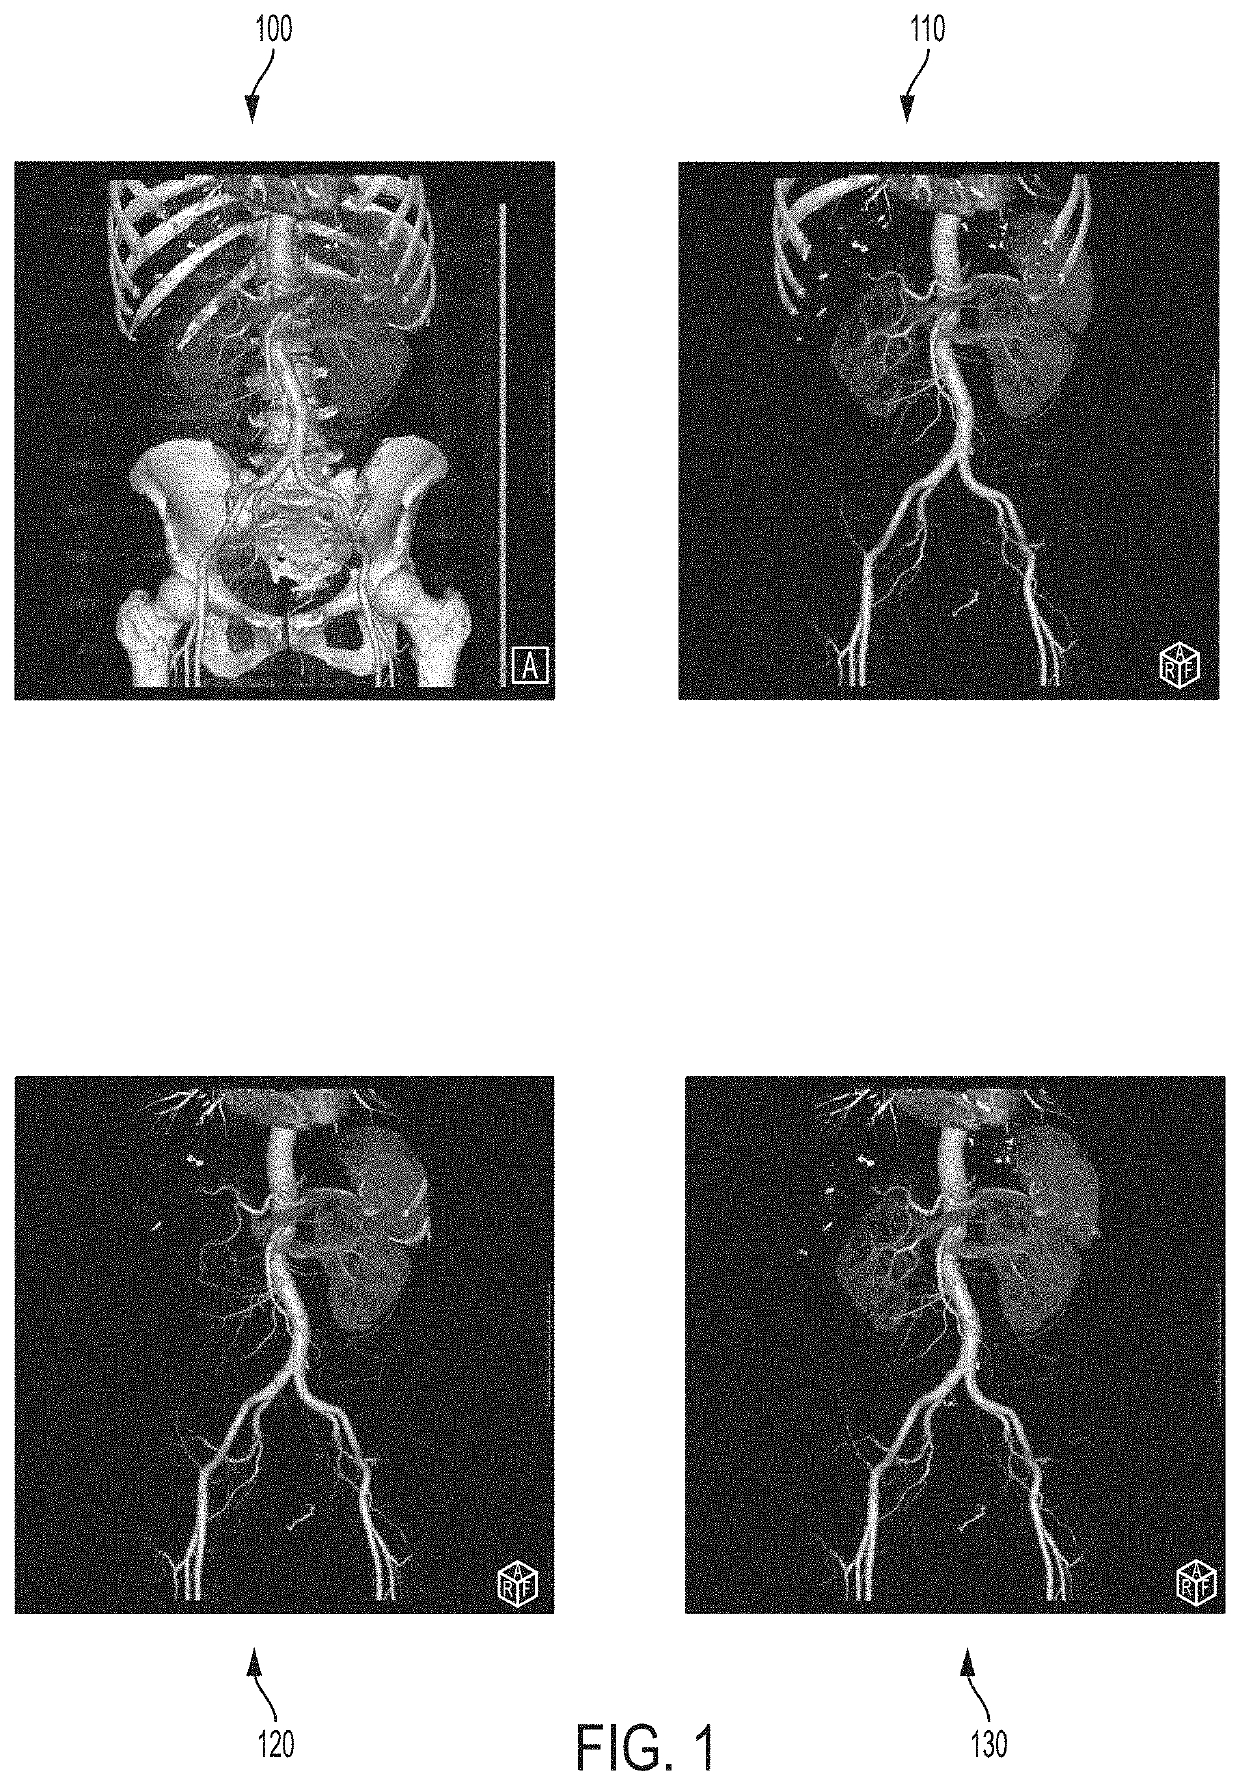 Deep learning based bone removal in computed tomography angiography